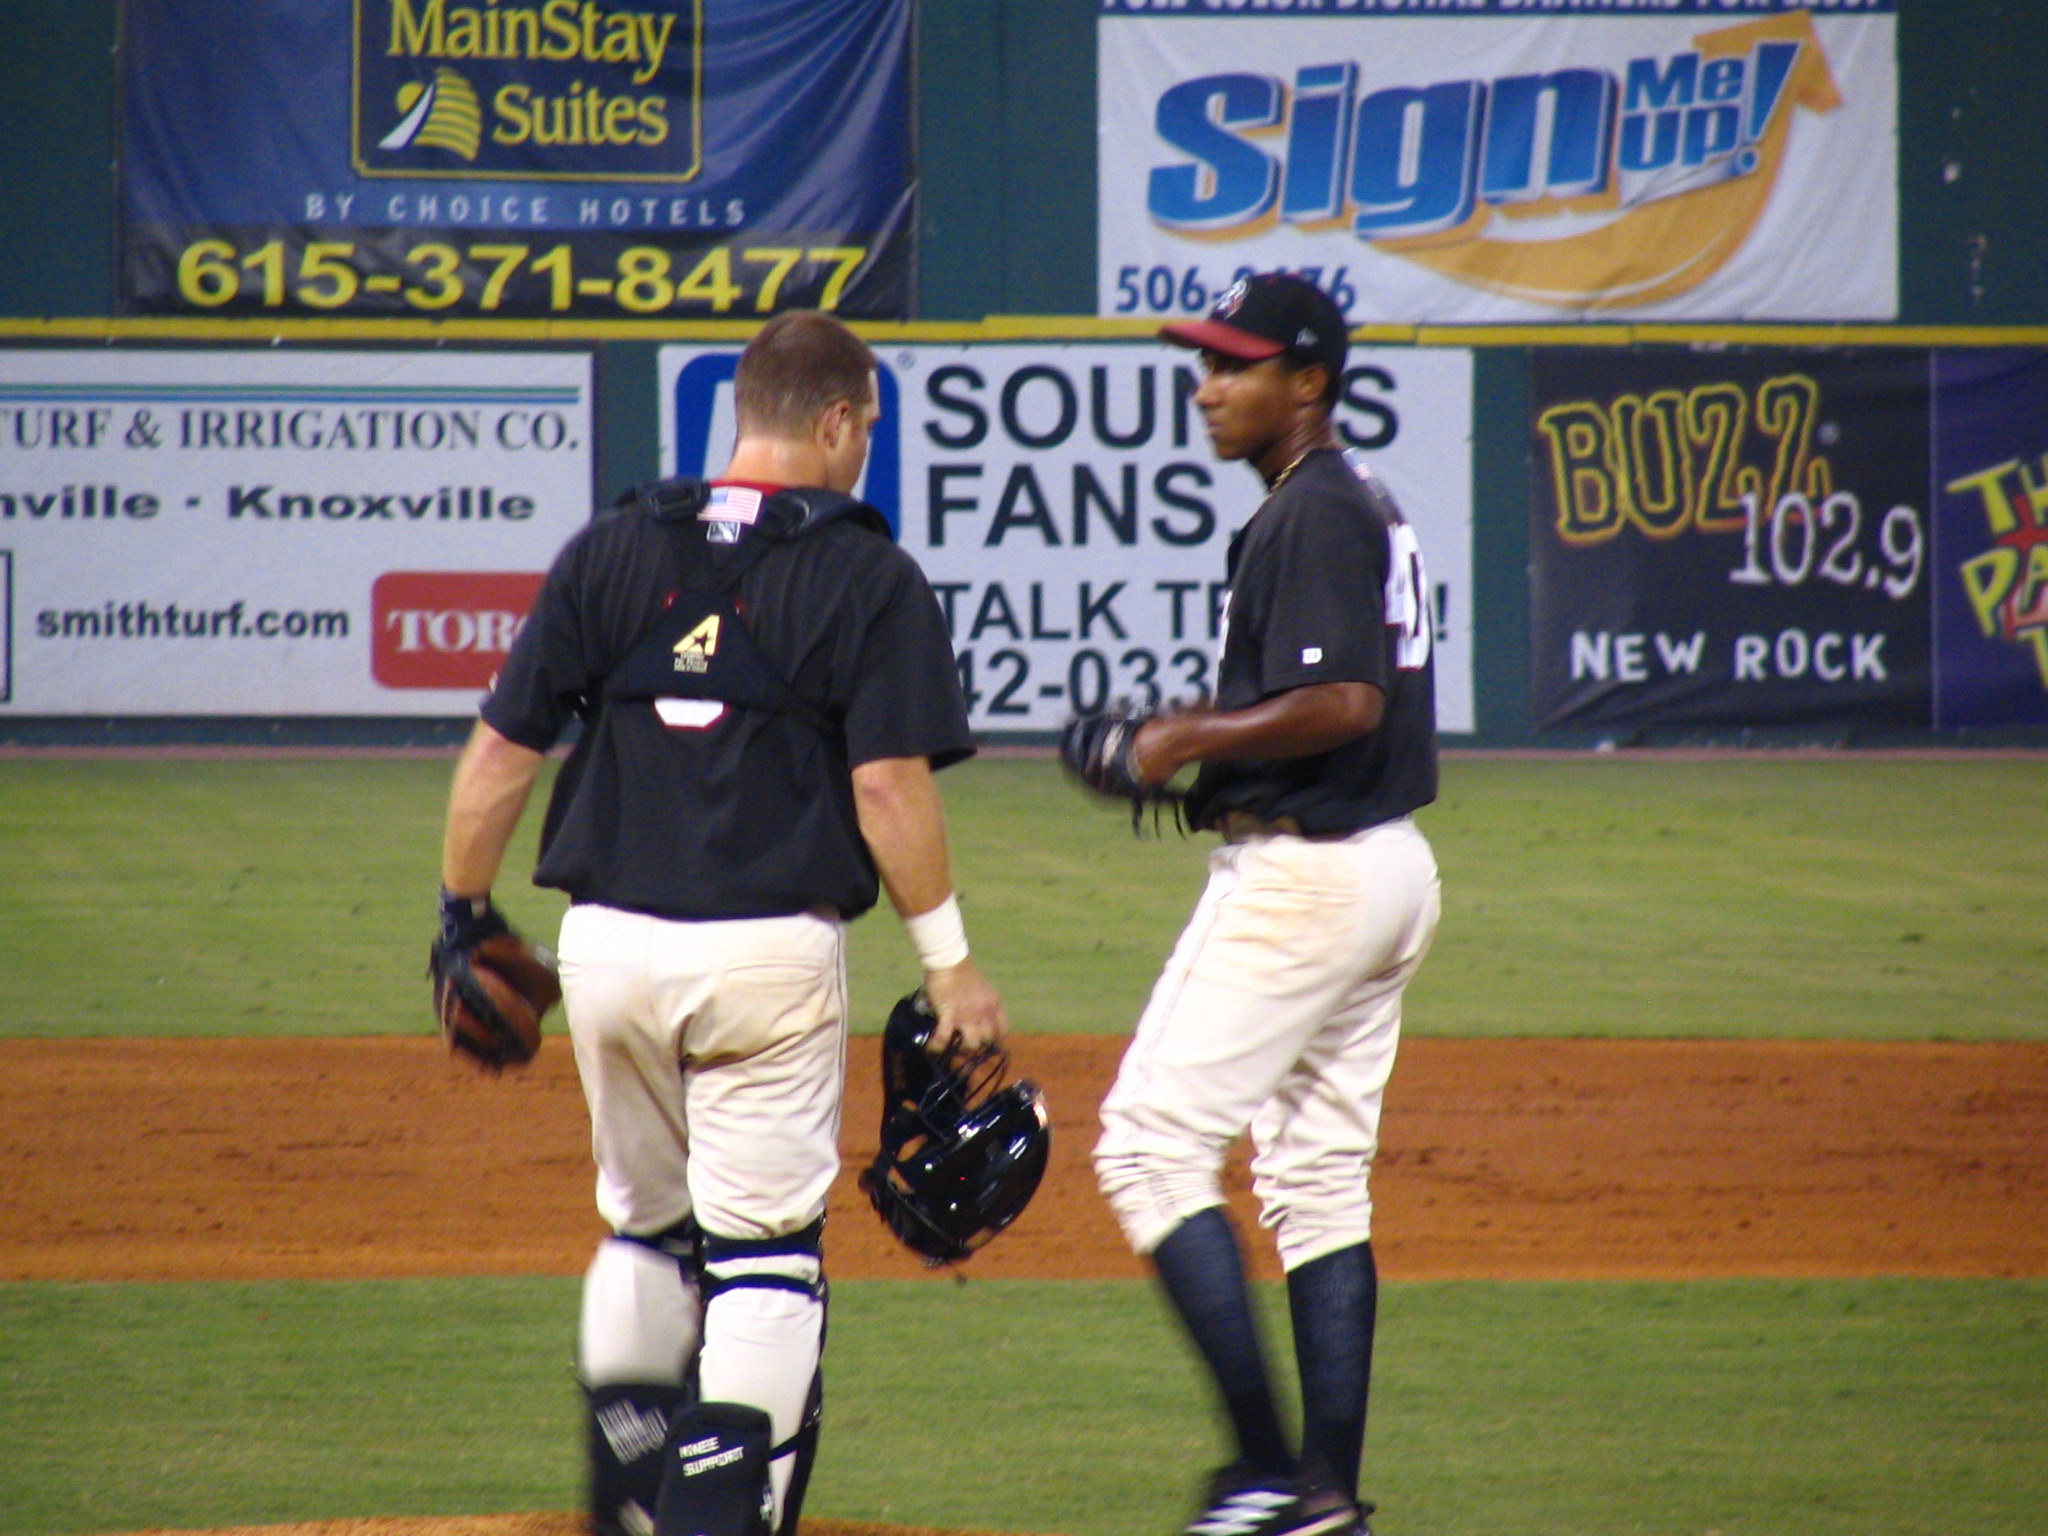 a baseball player standing next to another man on a field